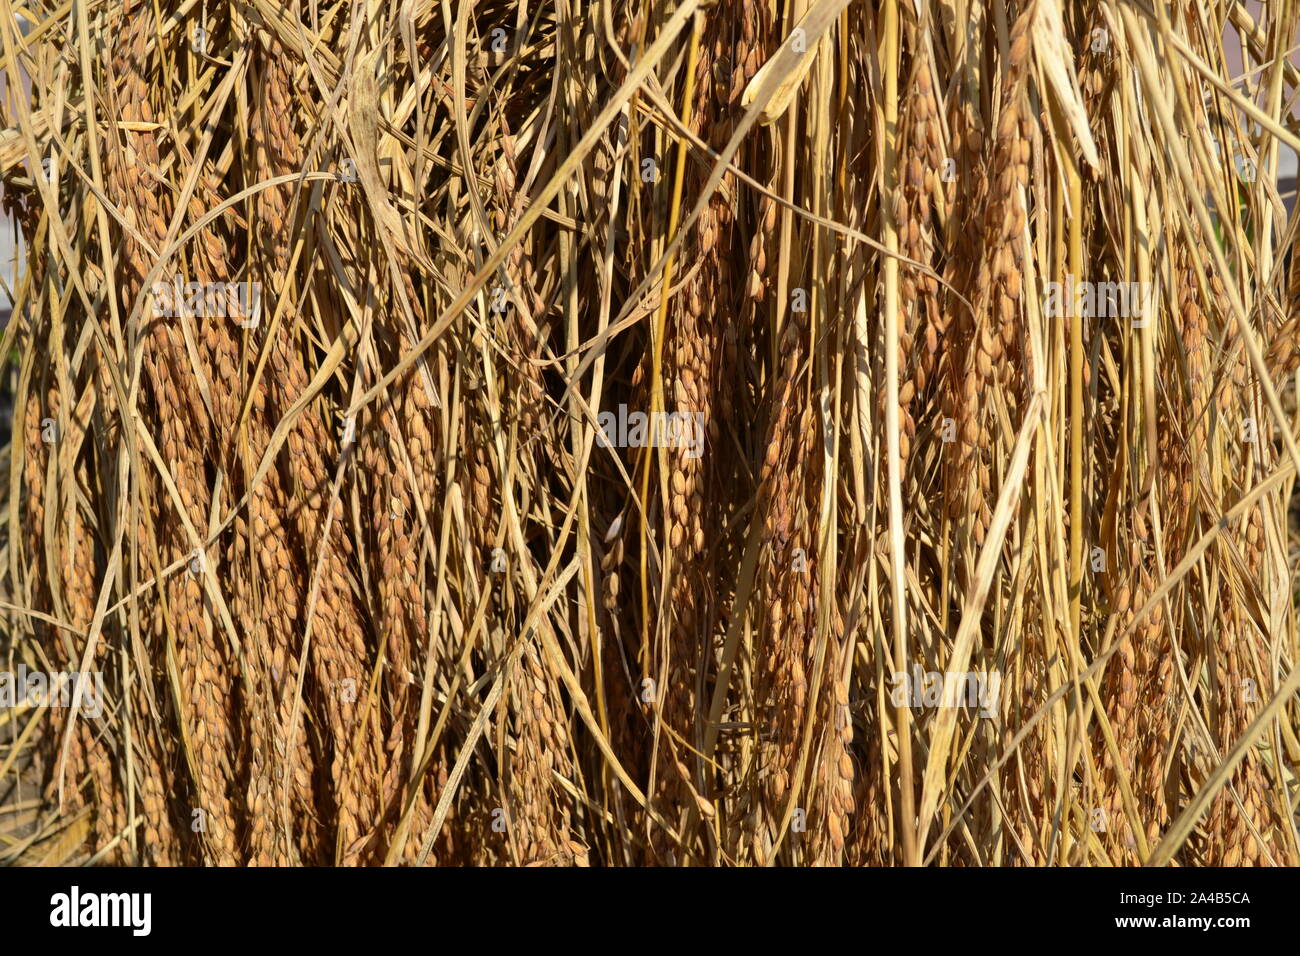 Close-up view to yellow ripe rice clusters harvesting in the field in autumn in a sunny day. Stock Photo